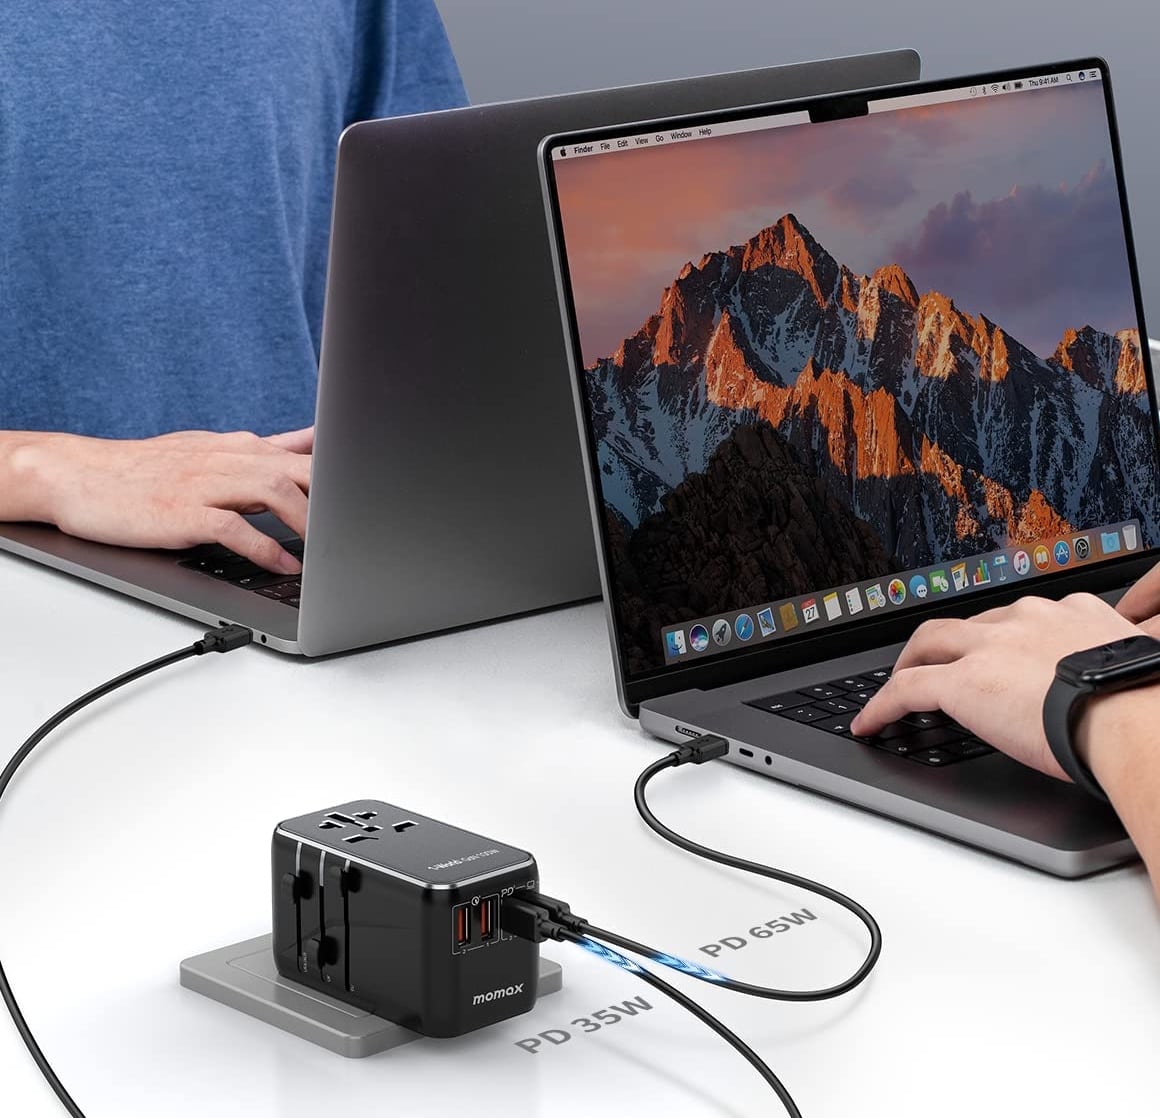 The 100W adapter is especially good for charging up two MacBooks at once.